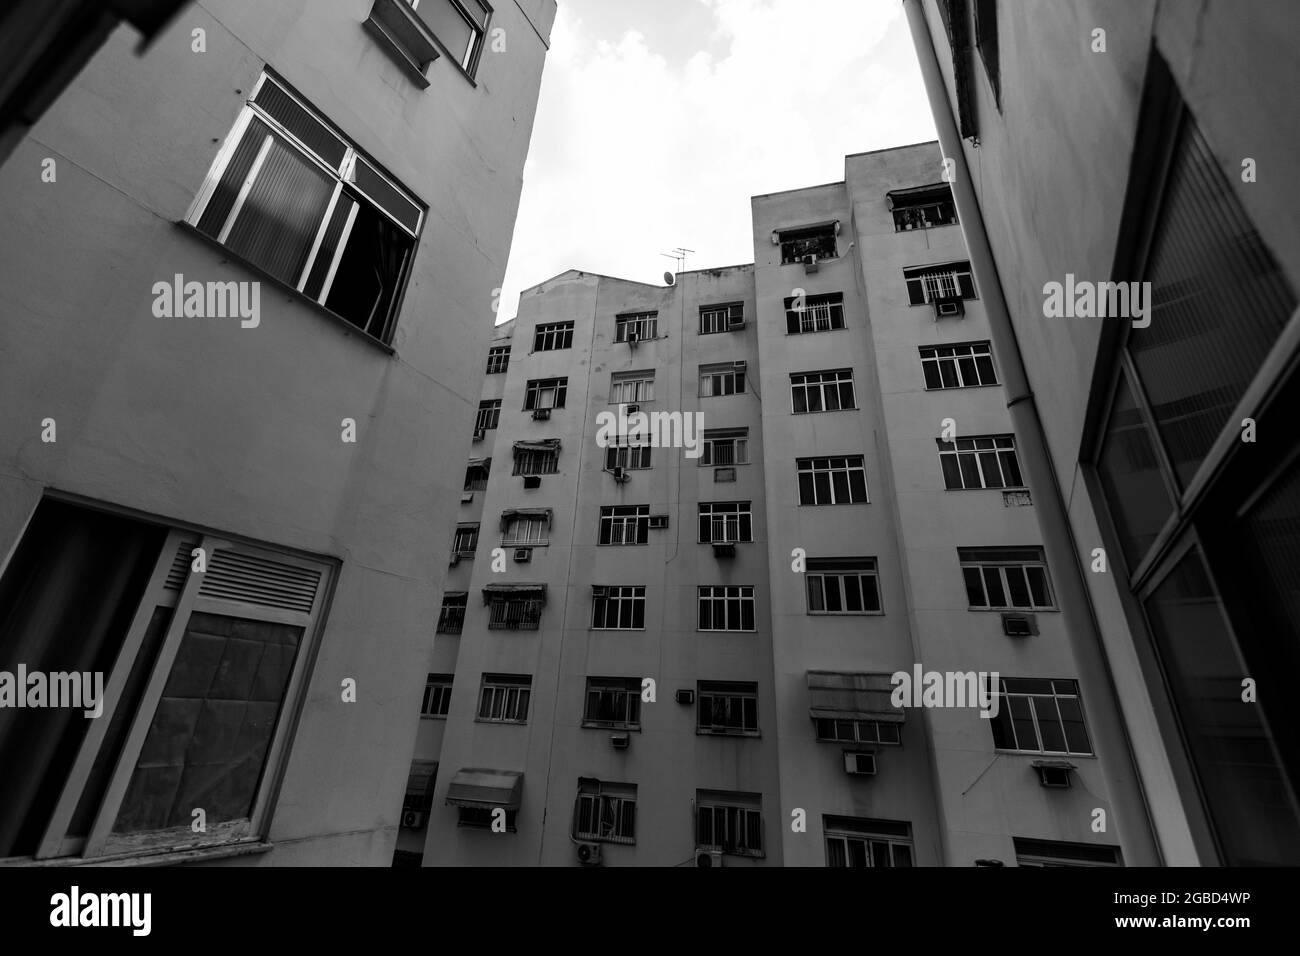 Grayscale shot of apartment buildings in the city Stock Photo